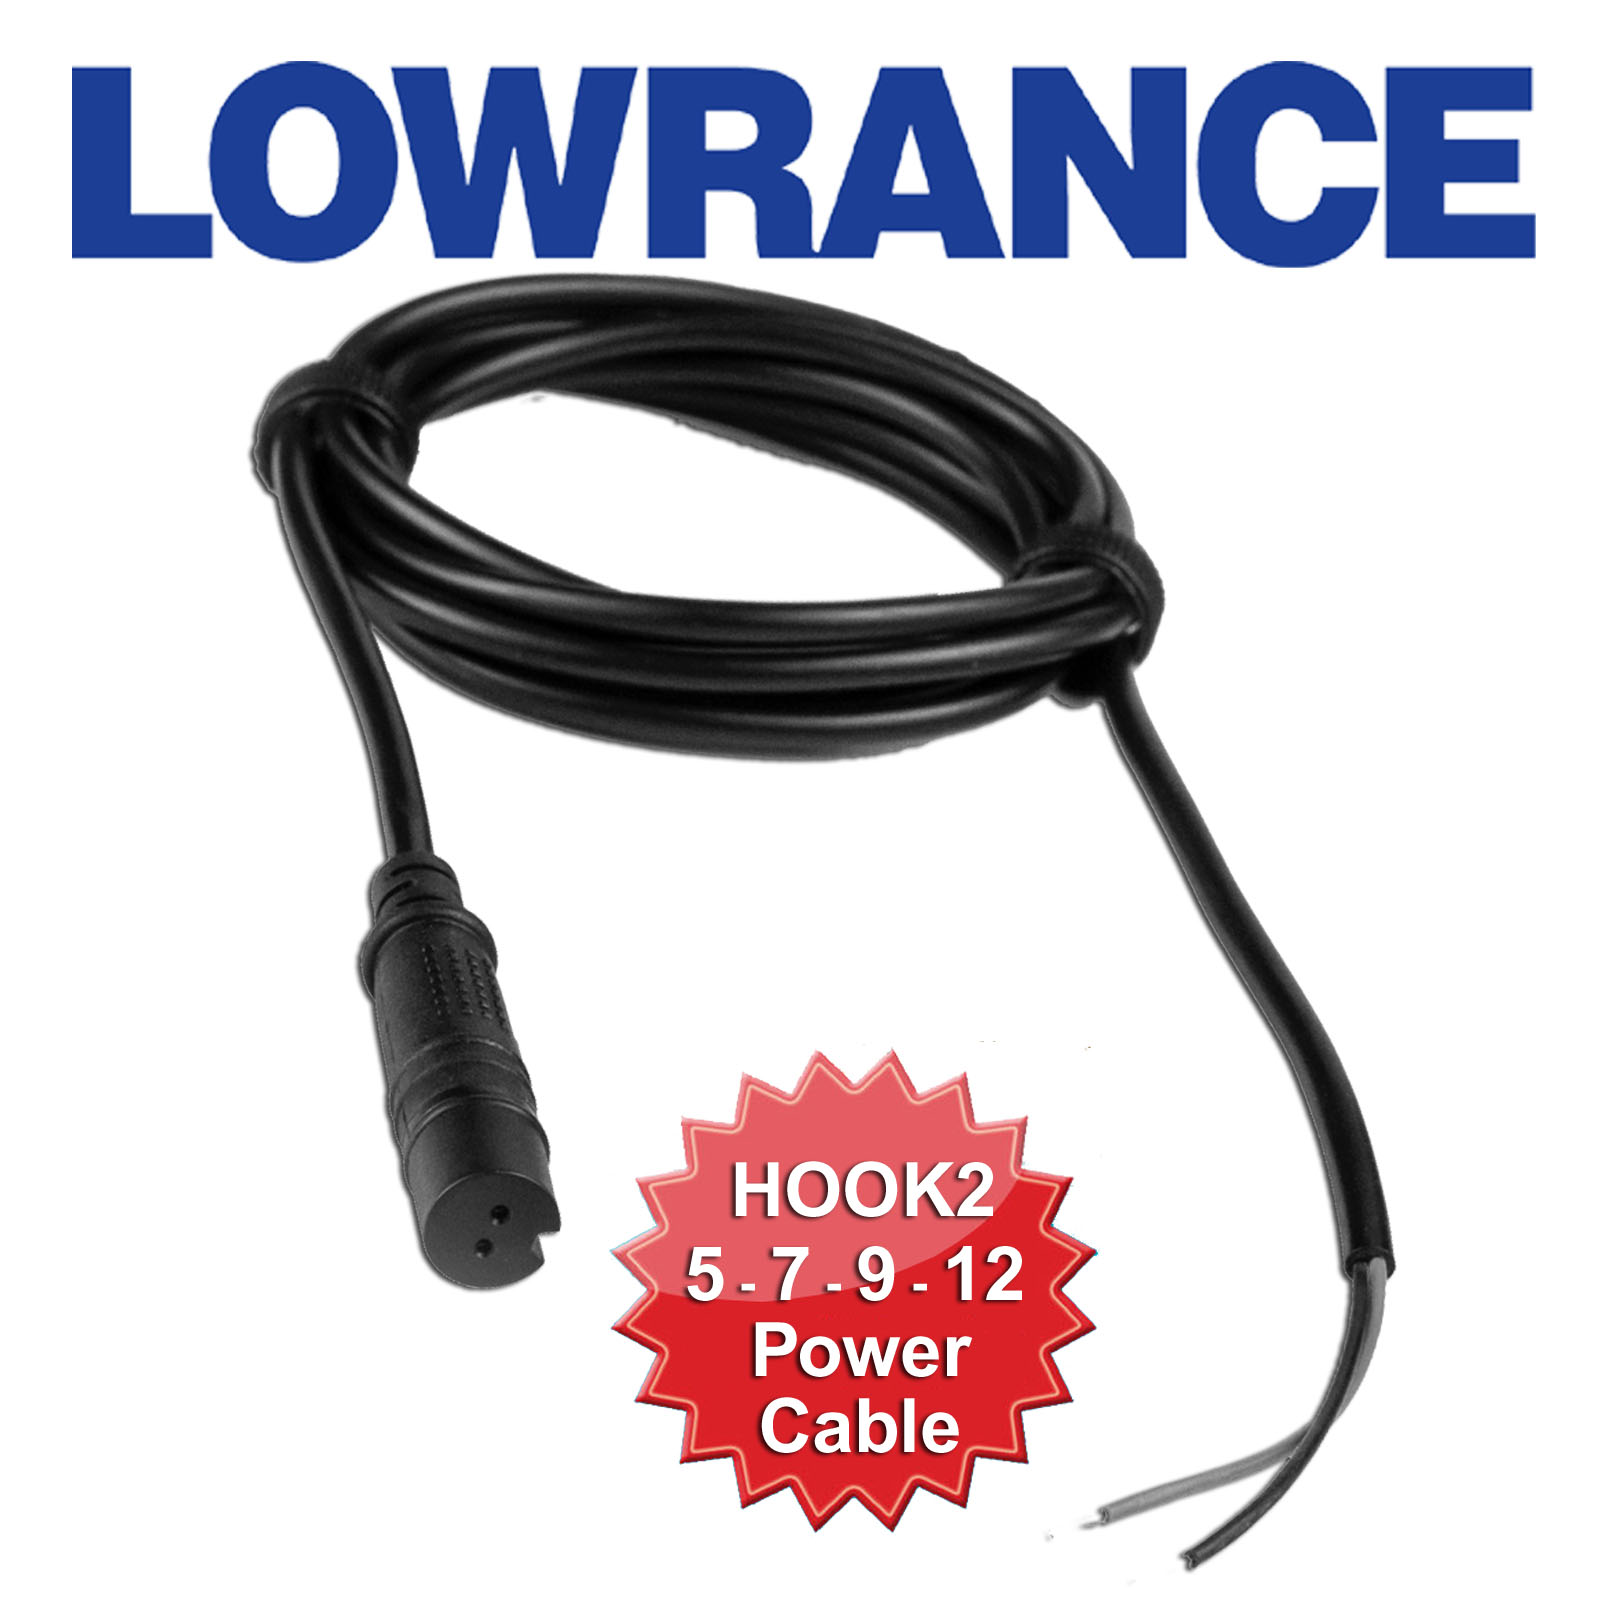 Lowrance 000-14172-001 Boating Electrical Equipment, Beige, Wire -   Canada